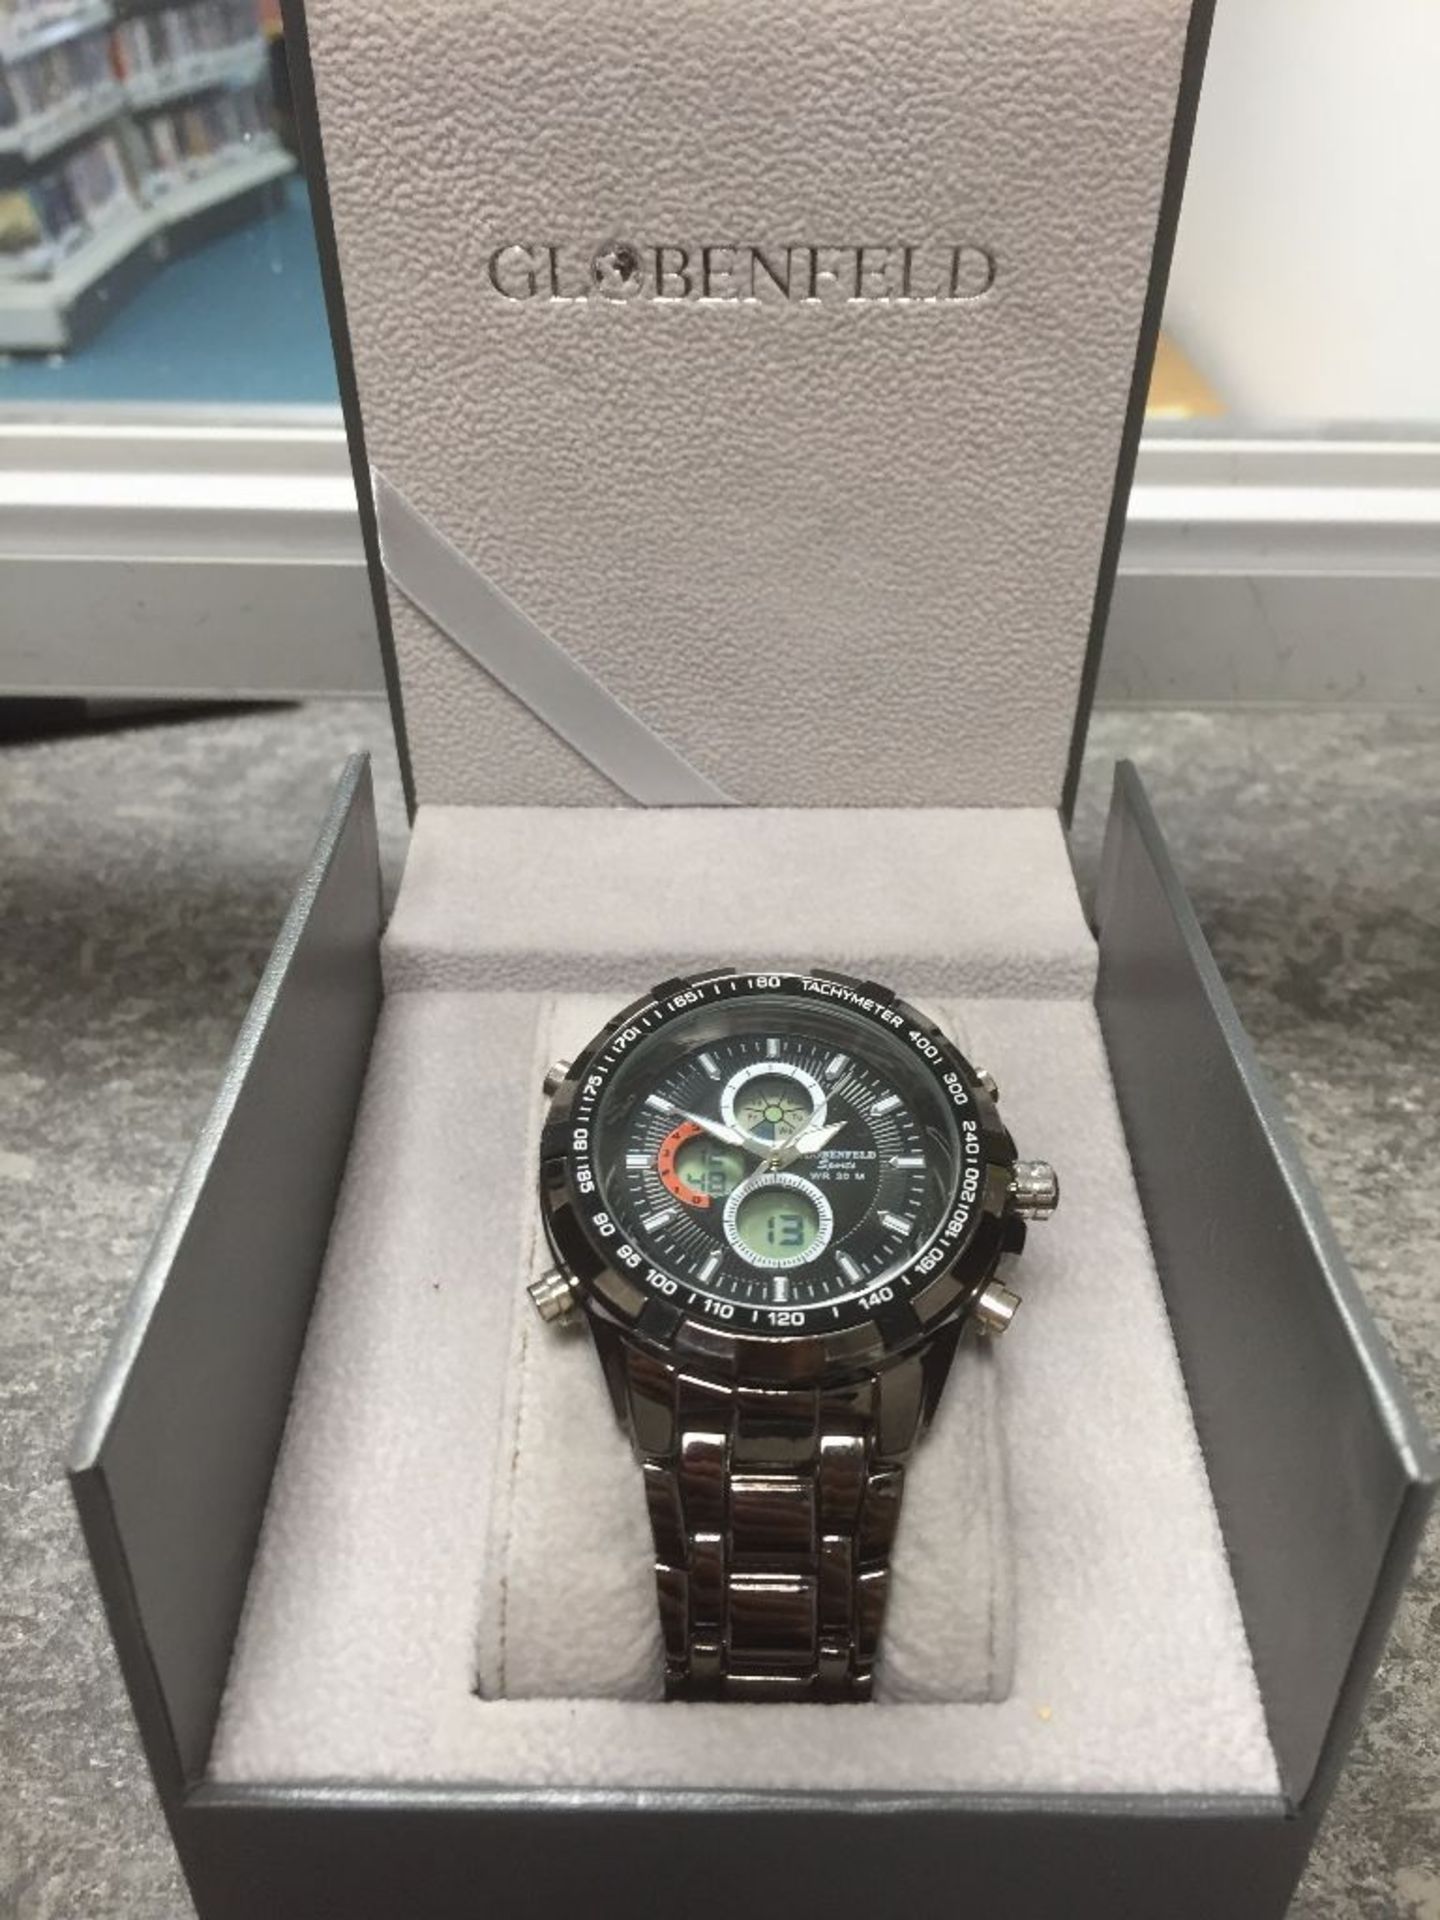 Globenfeld Sports Model 9101 This fabulous Globenfeld Sports watch comes with a Black dial and is - Image 3 of 3